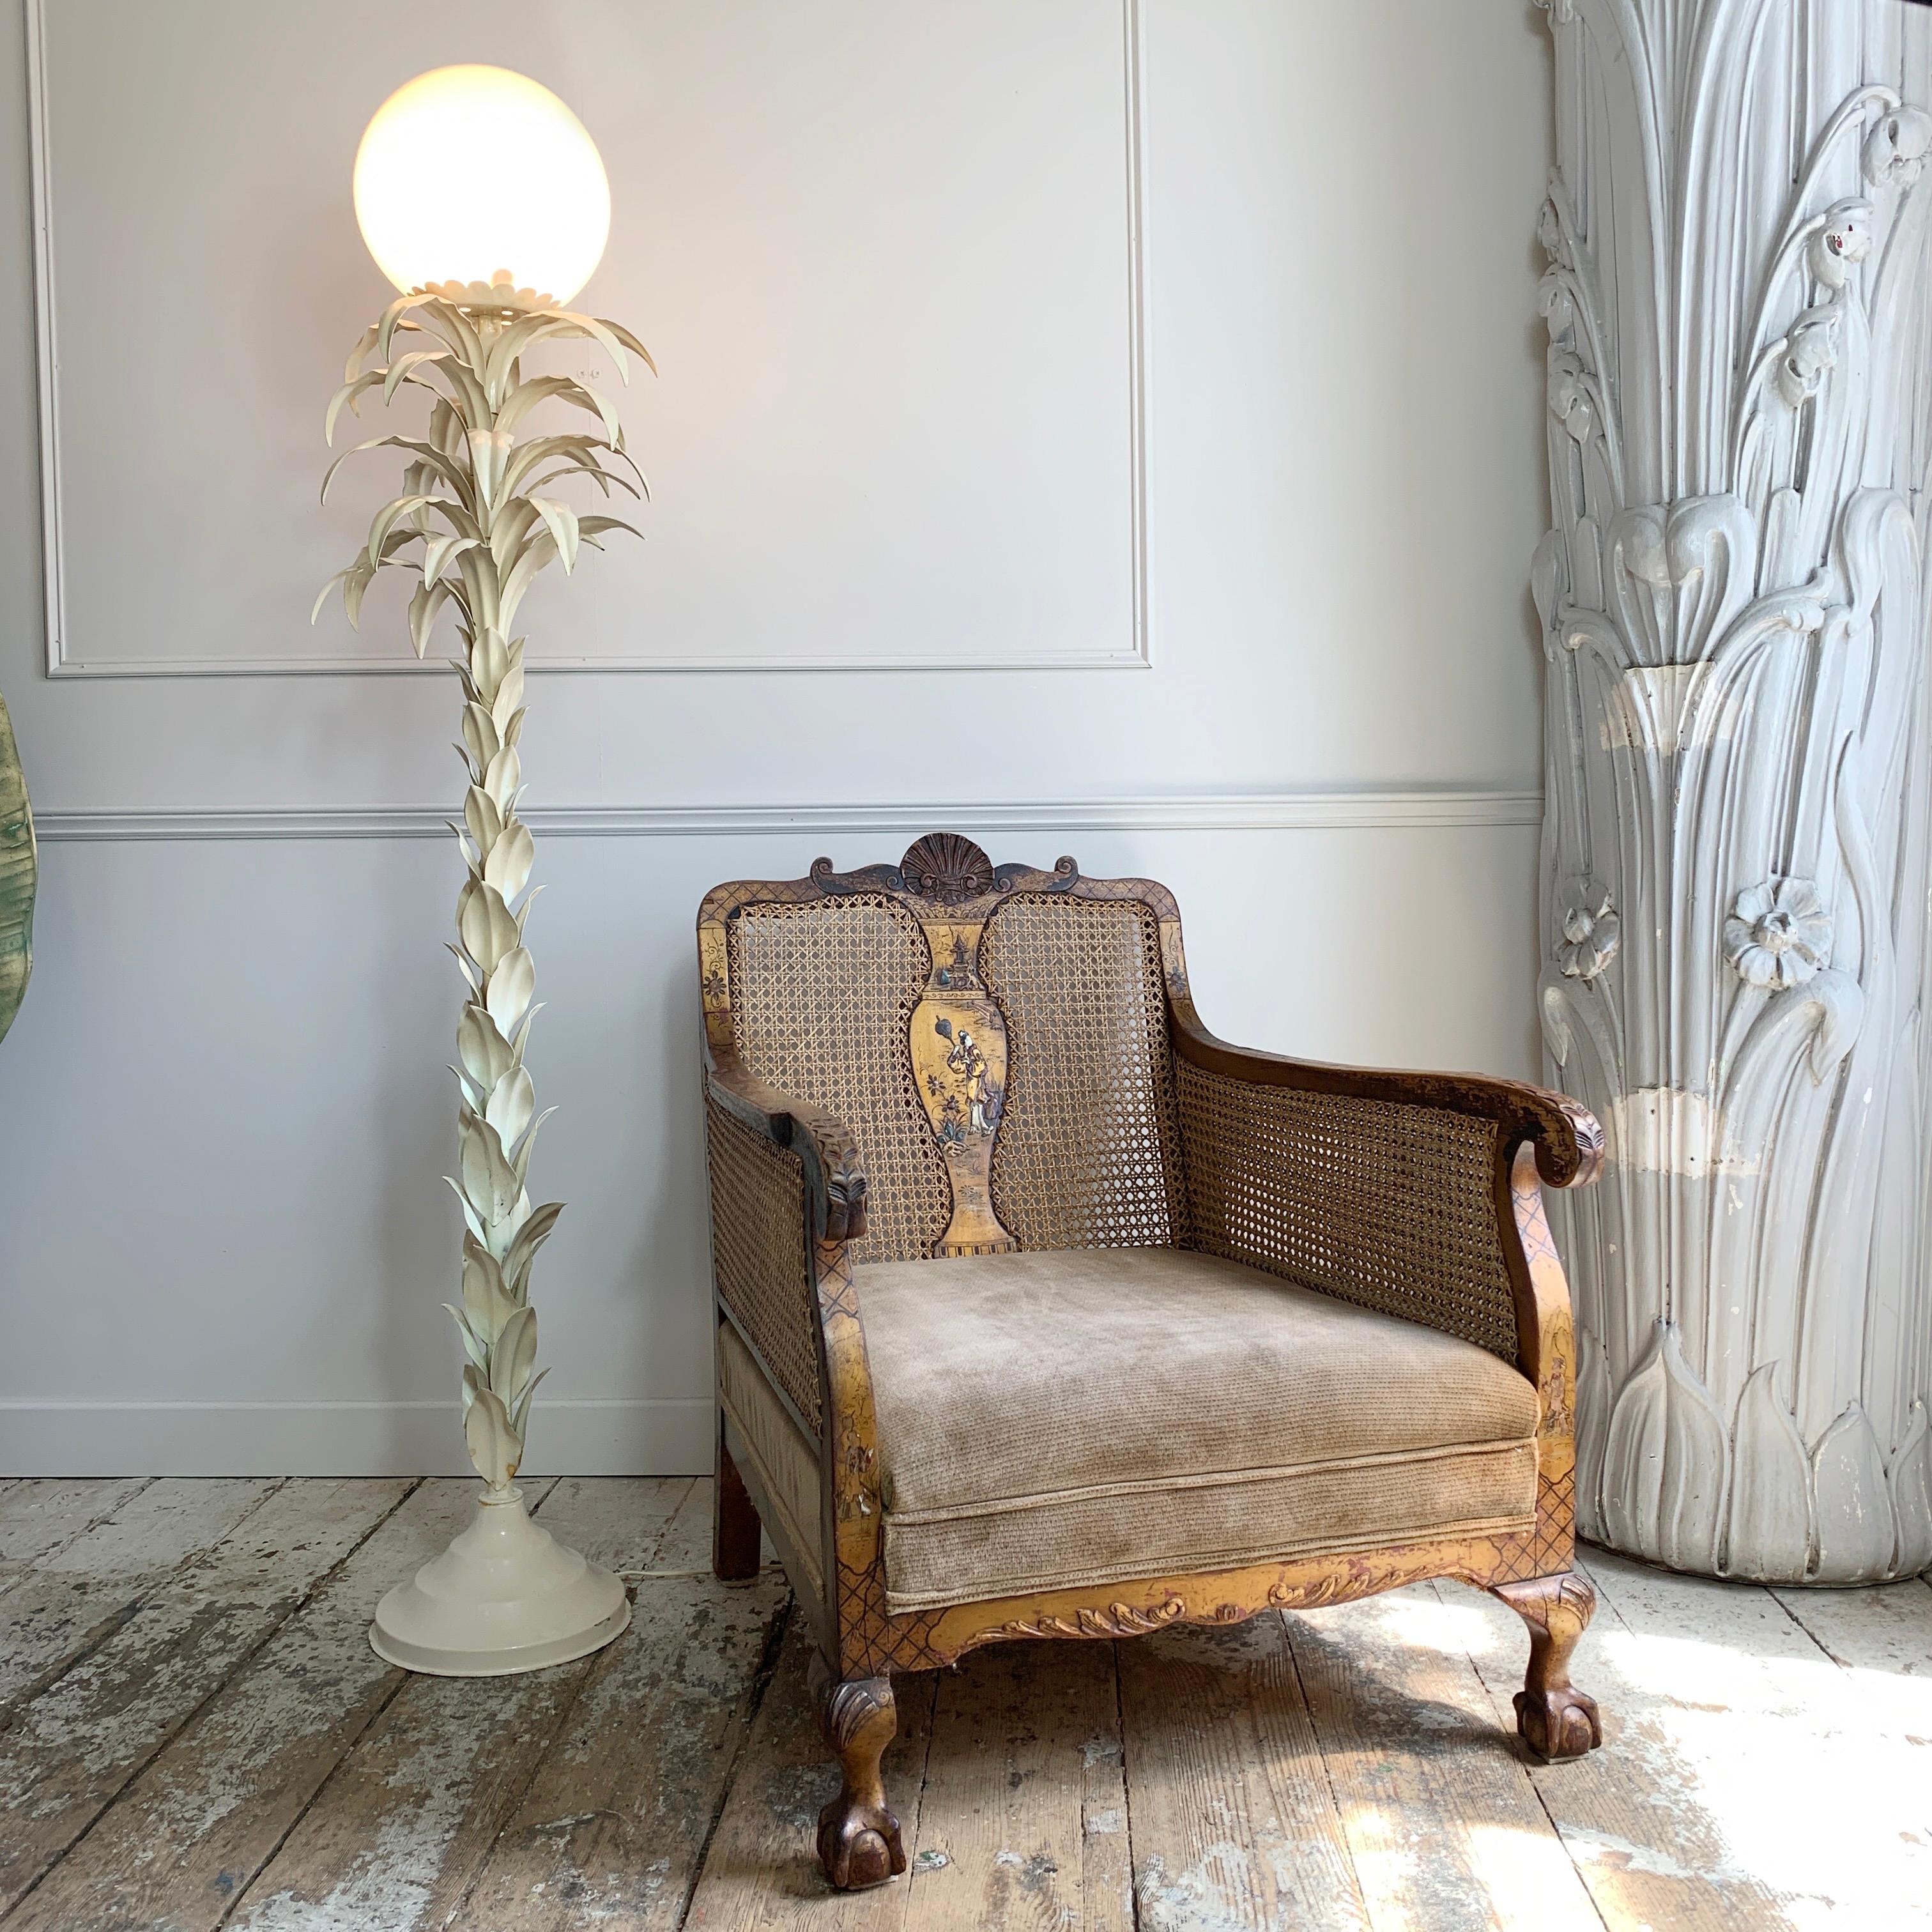 Beautifully elegant palm floor lamp, in the manner of Terzani. Italian, and dating from the 1970's/80's. In excellent vintage condition and still with the huge original milk glass globe shade. 

This is a very tall and striking piece of Italian